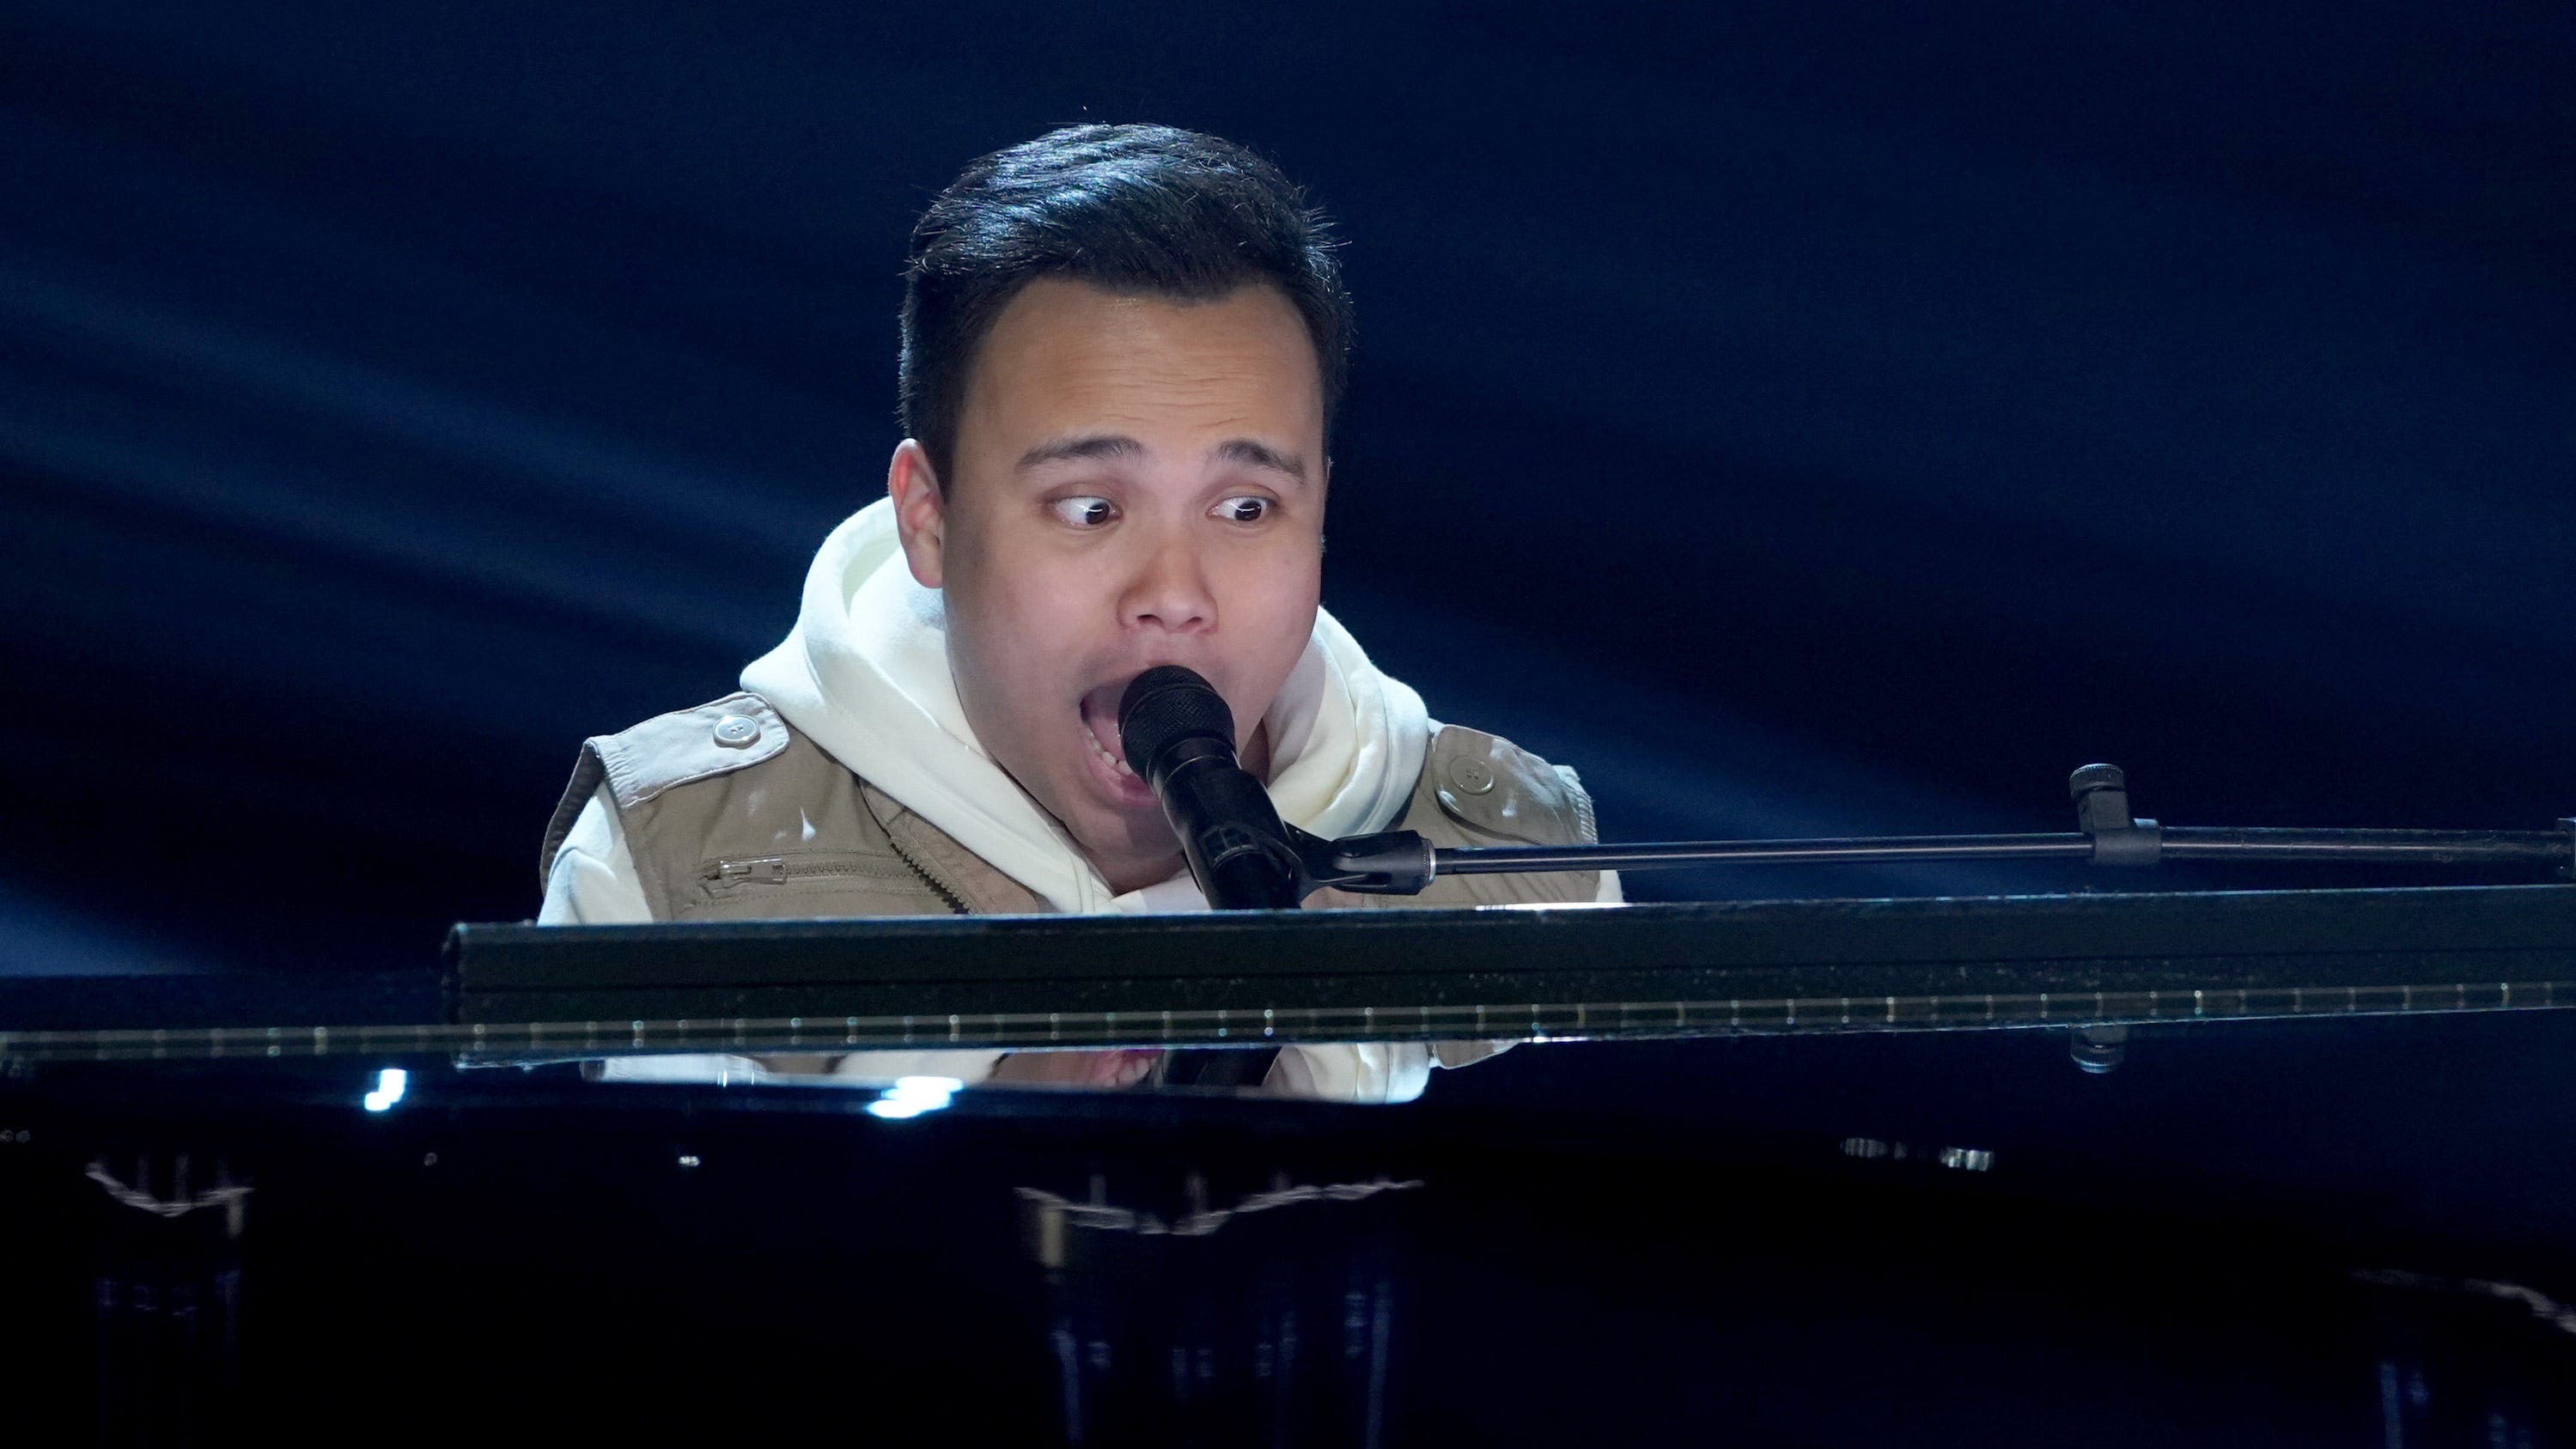 'AGT': Kodi Lee returns during tough live results show. Here's who advanced to semifinals - USA TODAY